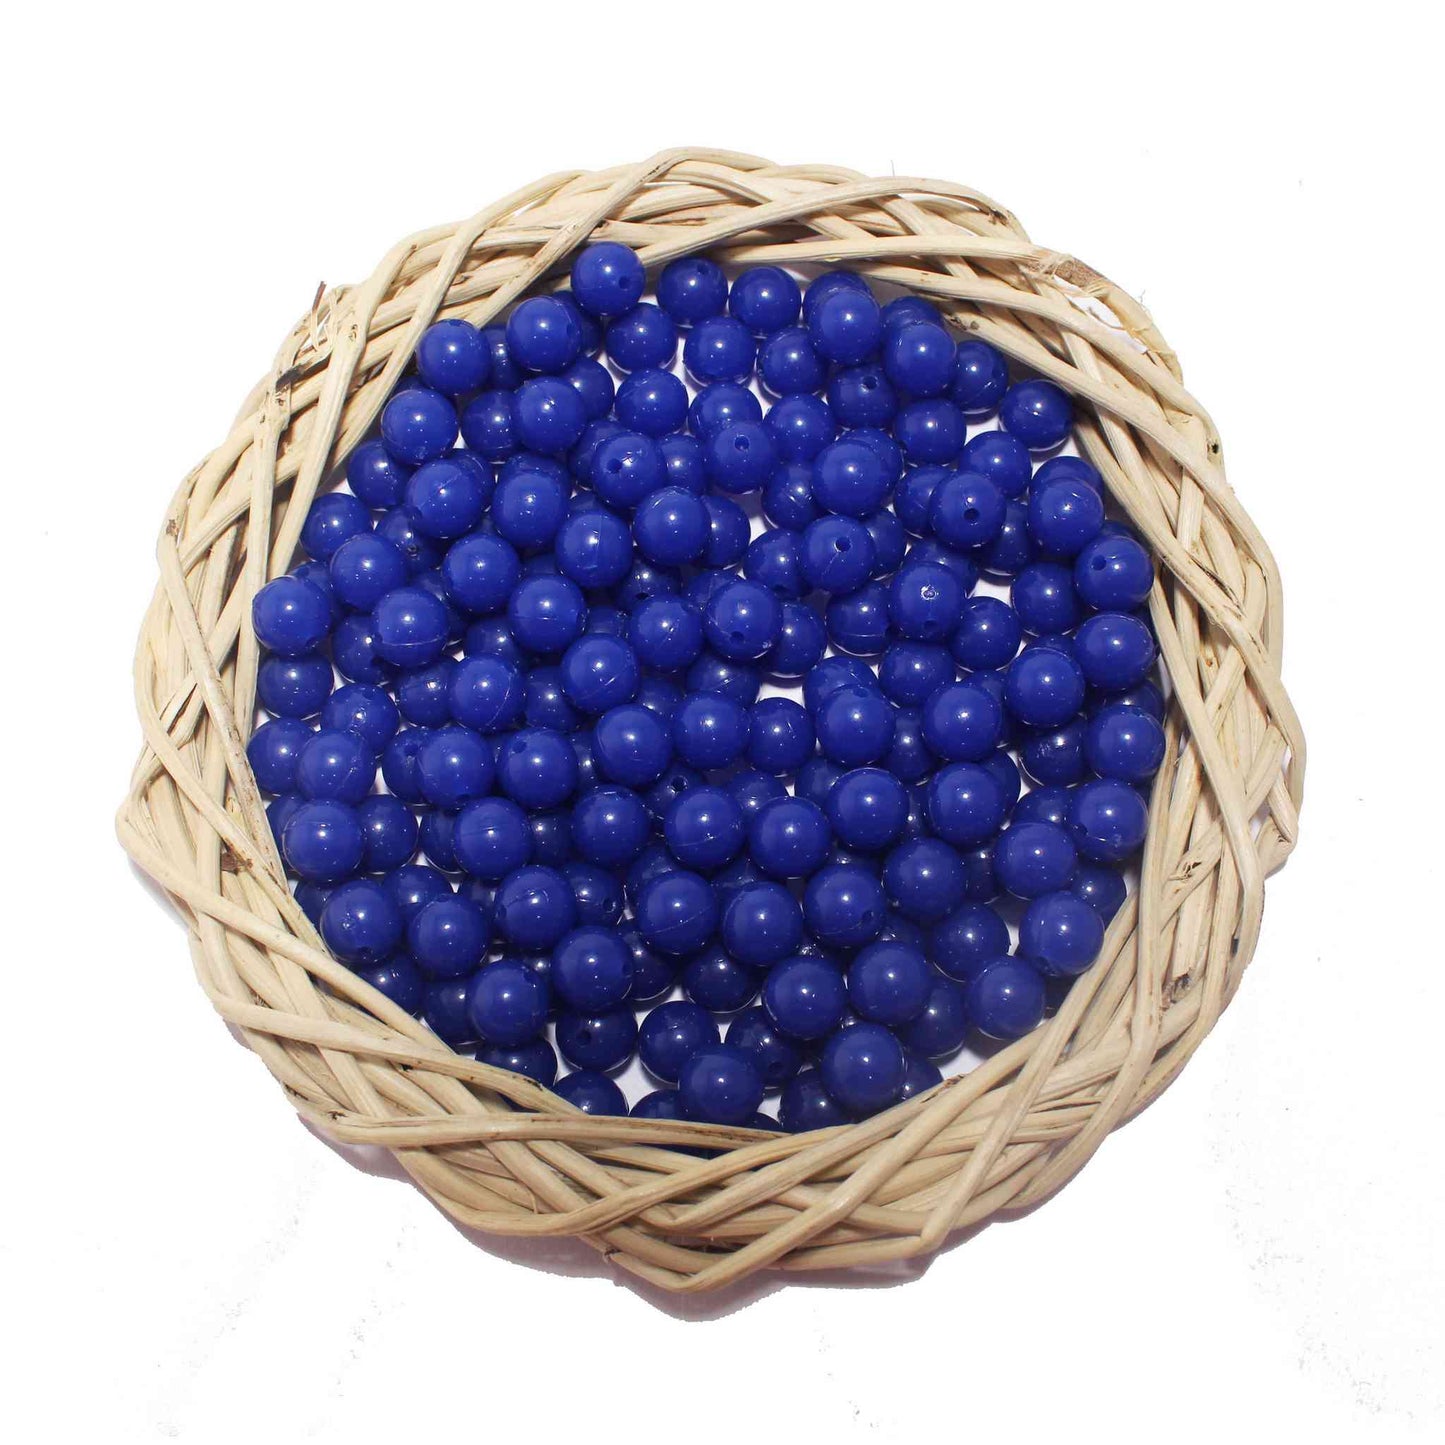 Premium quality Round Glass Beads for DIY Craft, Trousseau Packing or Decoration - Design 734, Dark Blue - Indian Petals